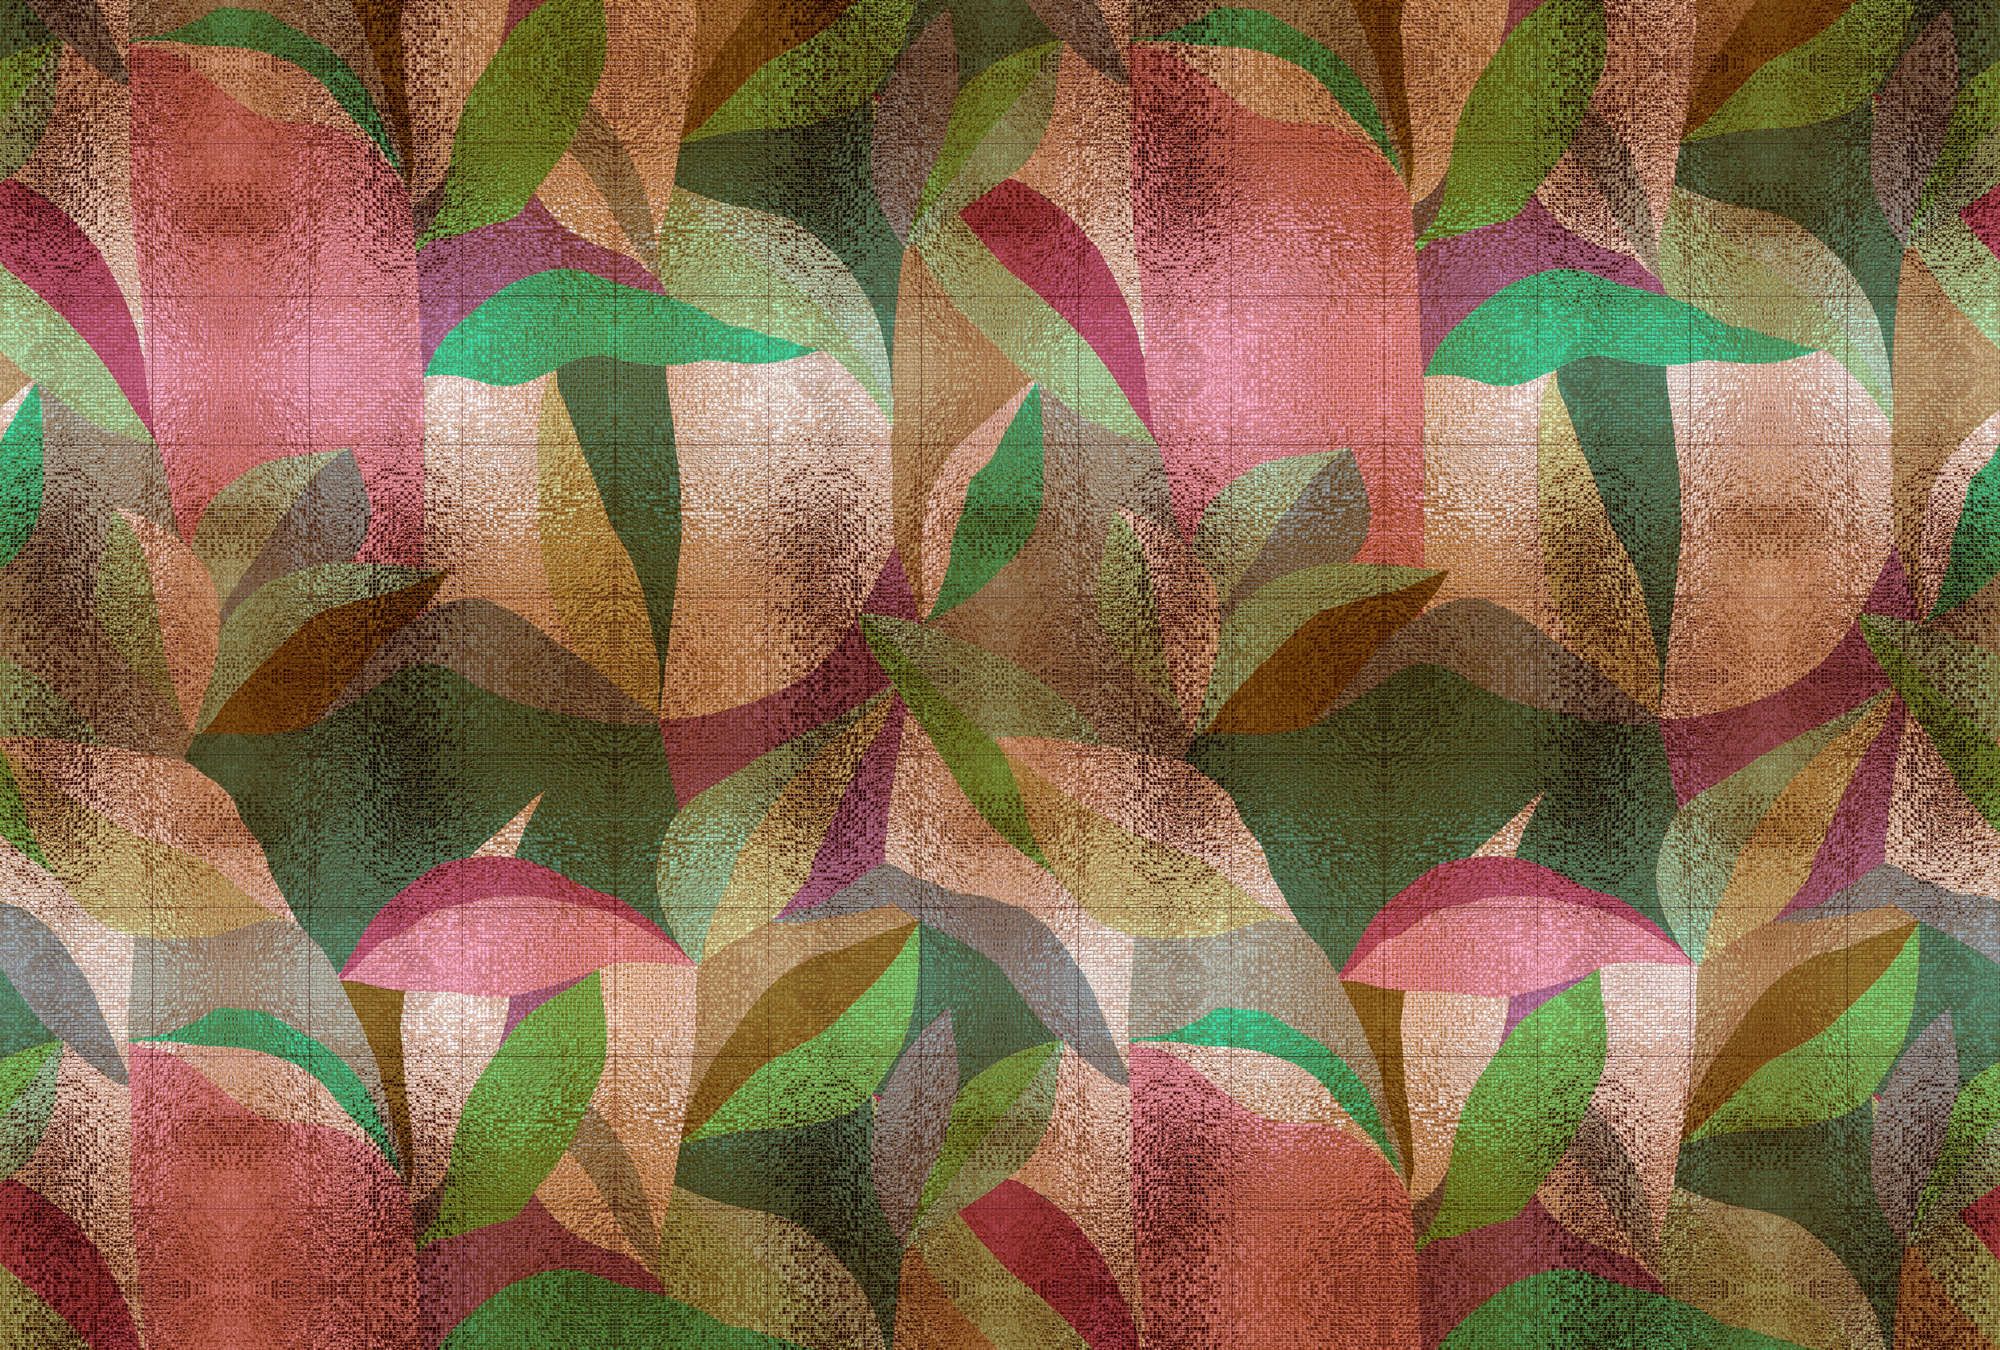             Photo wallpaper »grandezza« - Abstract colourful leaf design with mosaic structure - Matt, smooth non-woven fabric
        